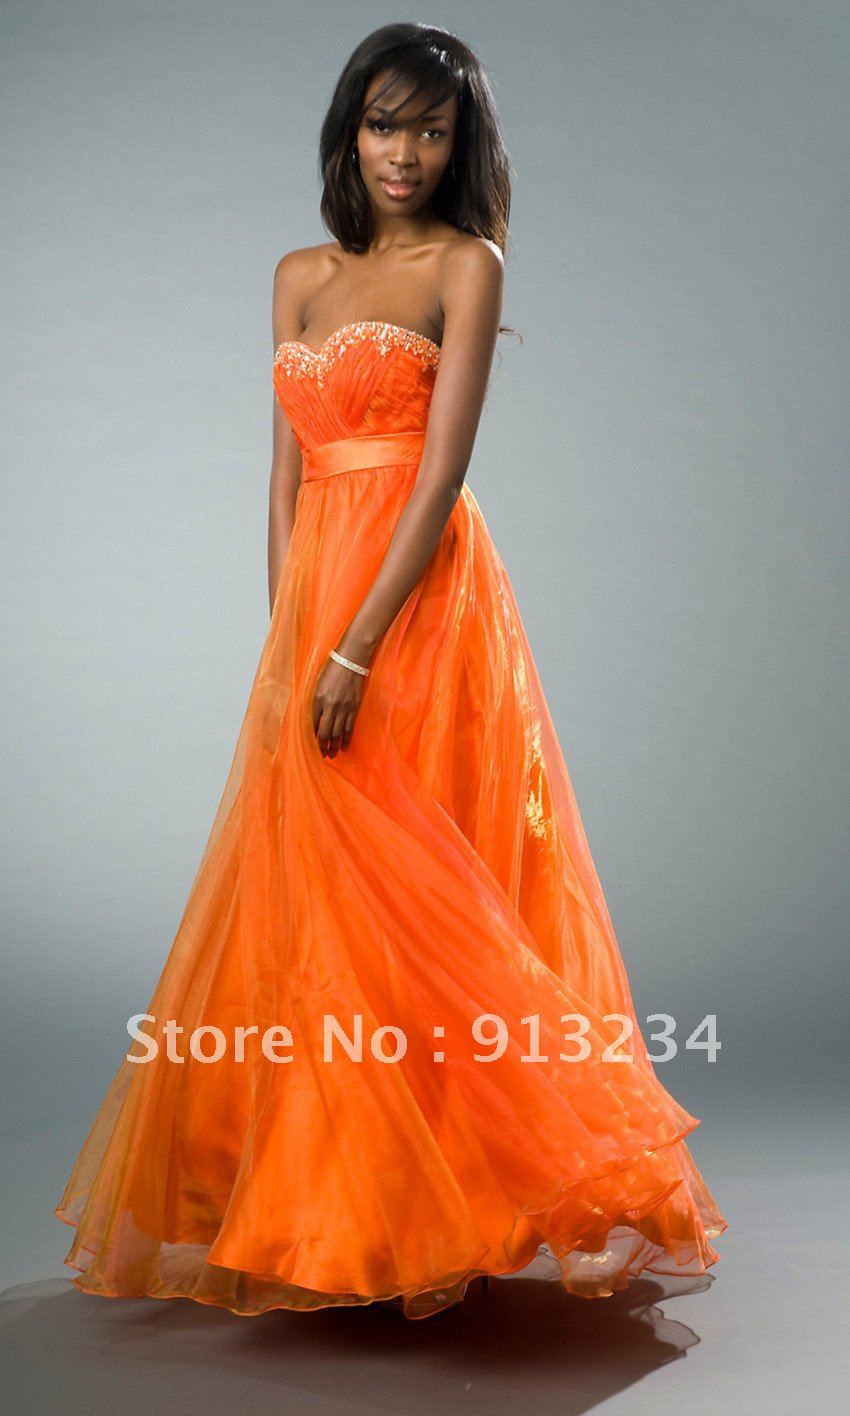 Free shipping 2013 Elegant Yellow full length Sequined Beading chiffon celebrity party dresses evening gowns 084